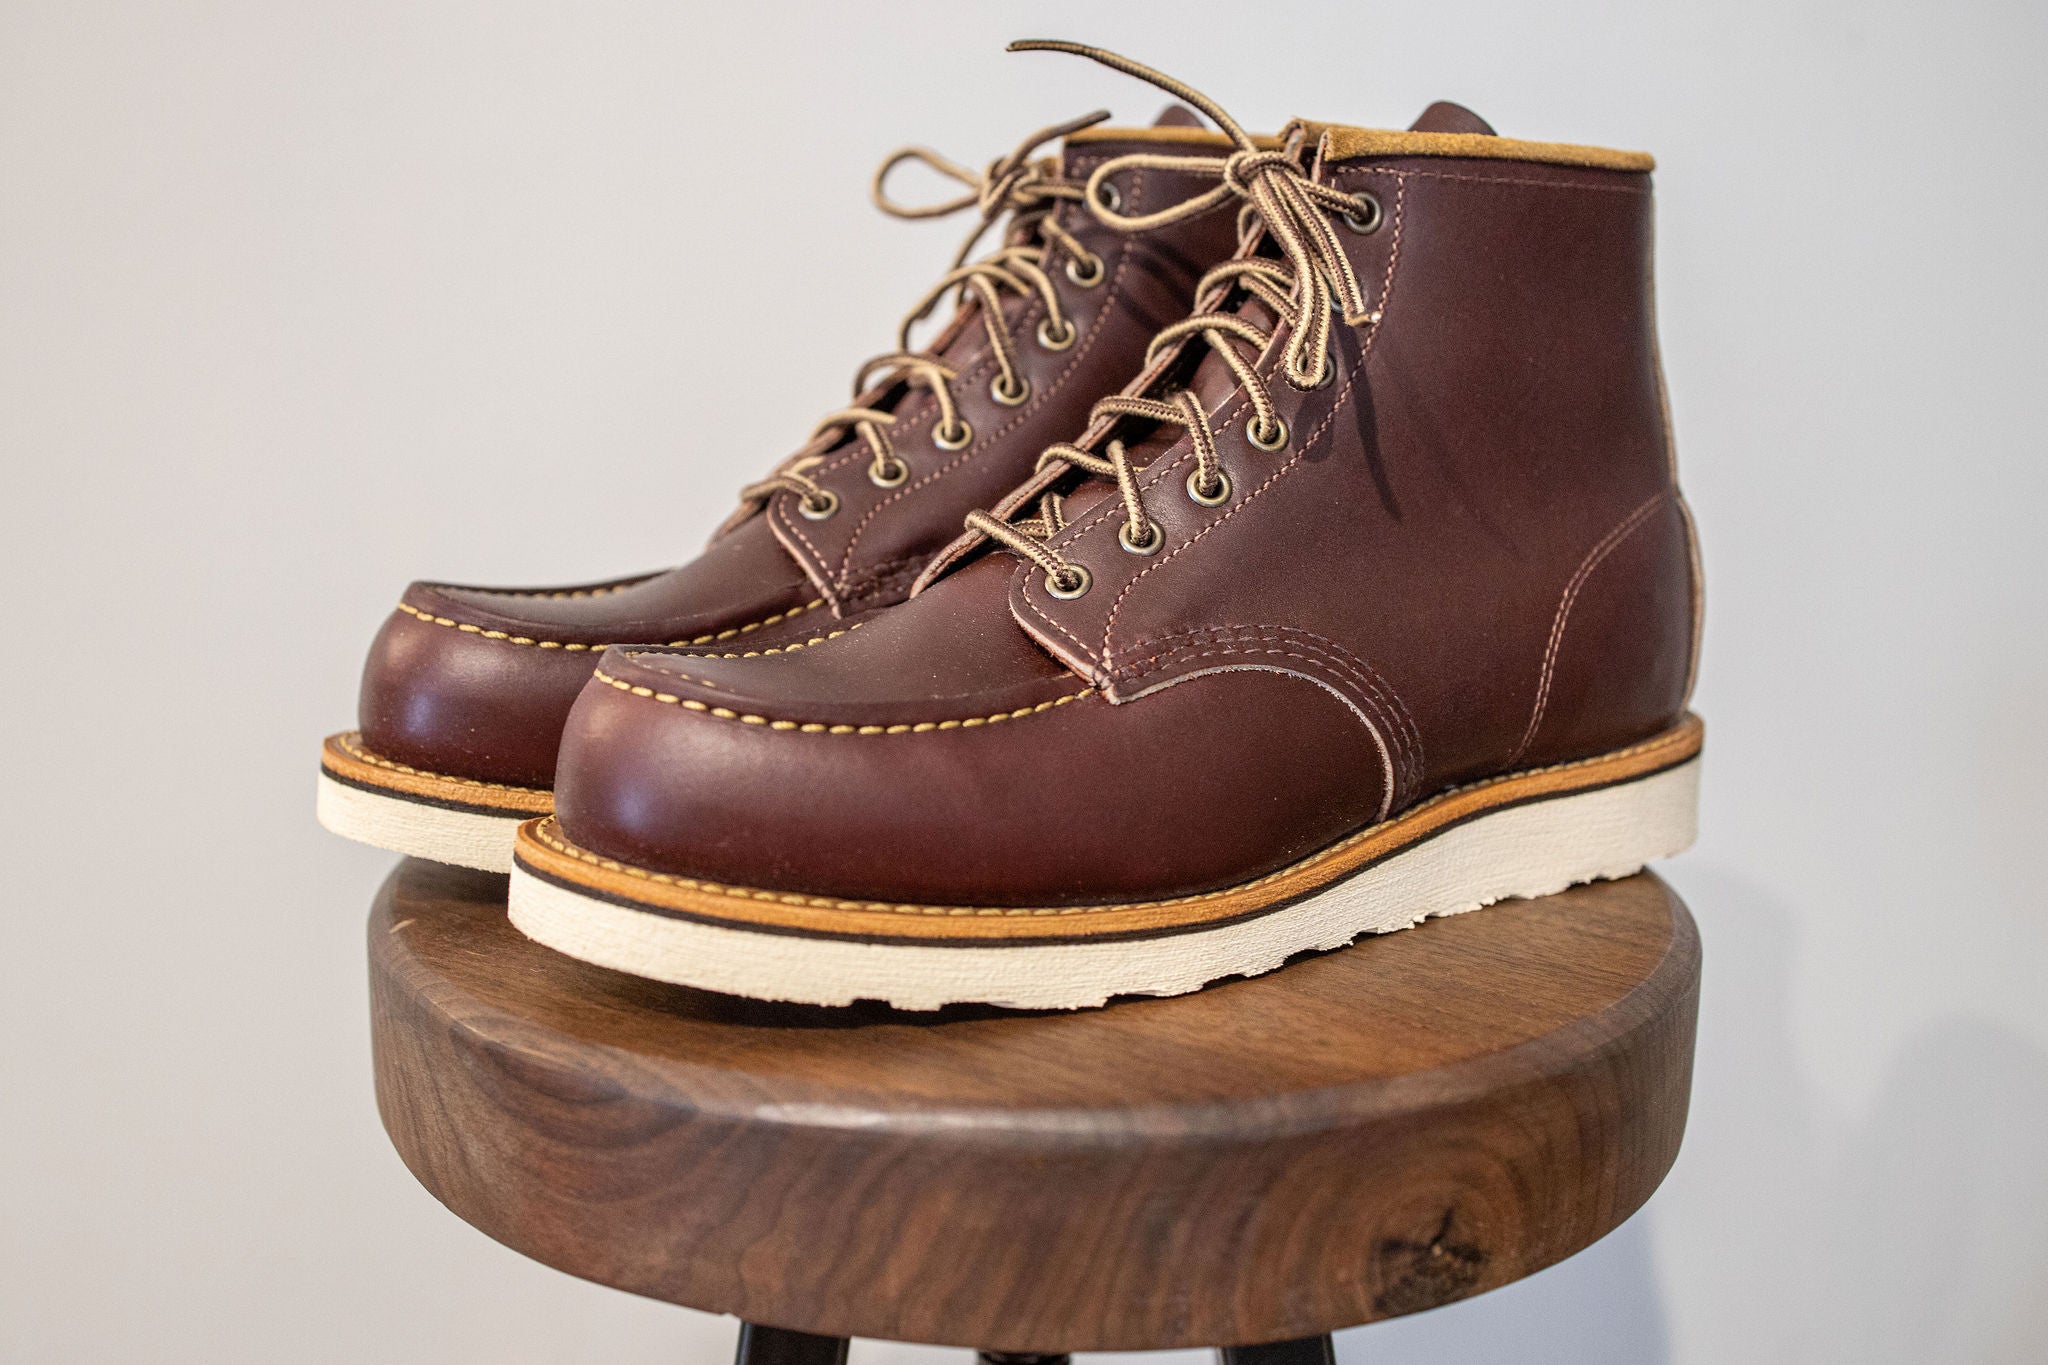 red wing heritage boots moc toe